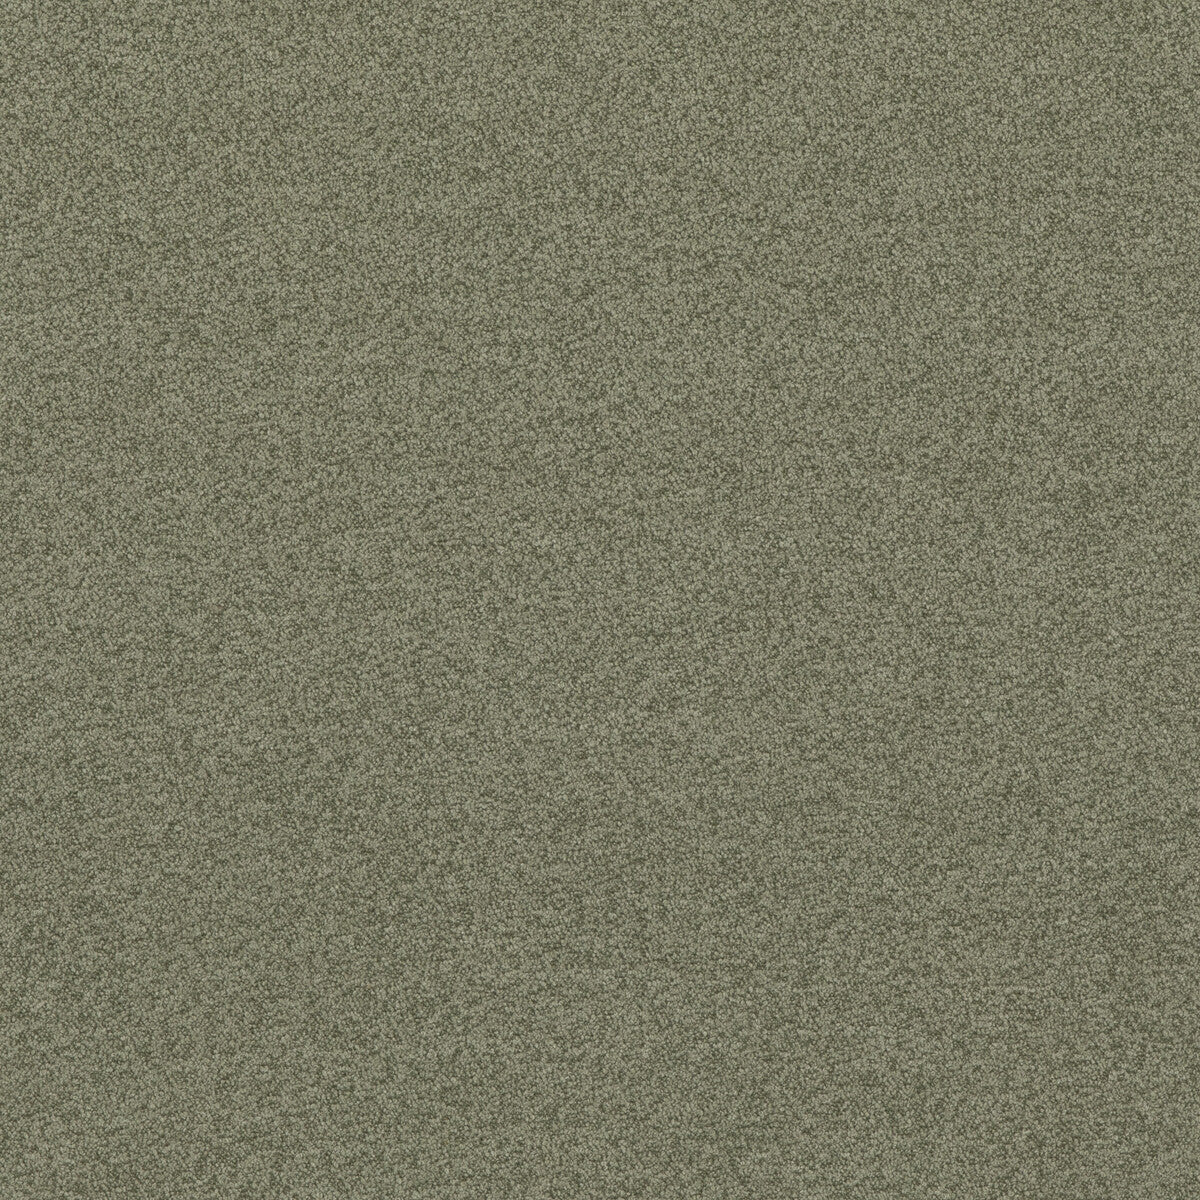 Baker House Boucle fabric in sage color - pattern BF10965.790.0 - by G P &amp; J Baker in the Baker House Boucle collection